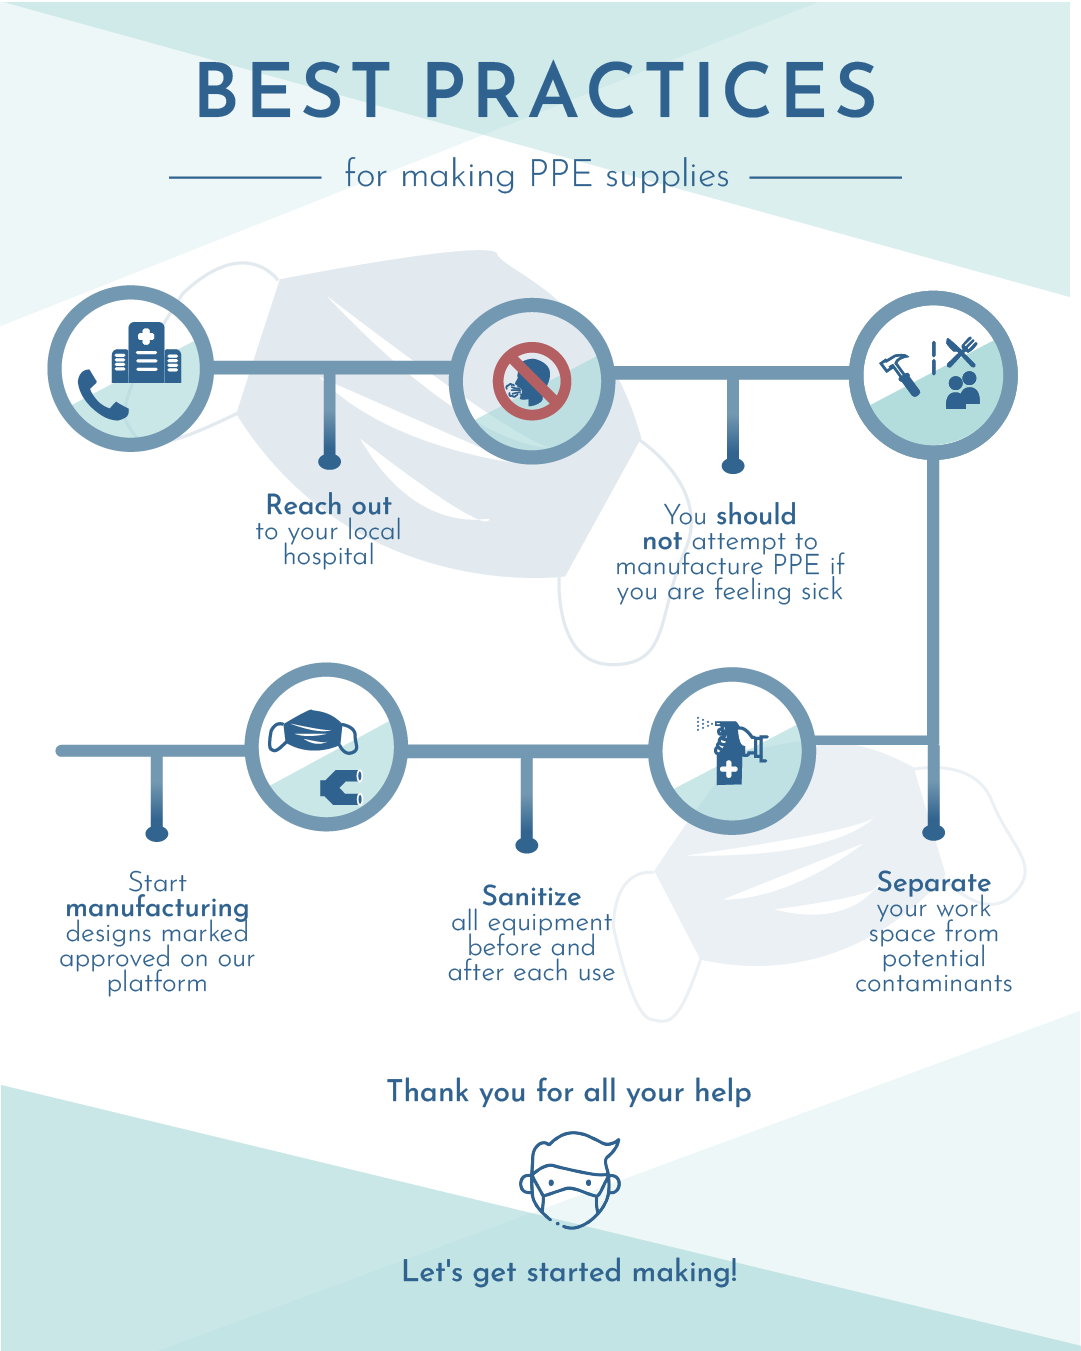 Best Practices for making PPE supplies infographic